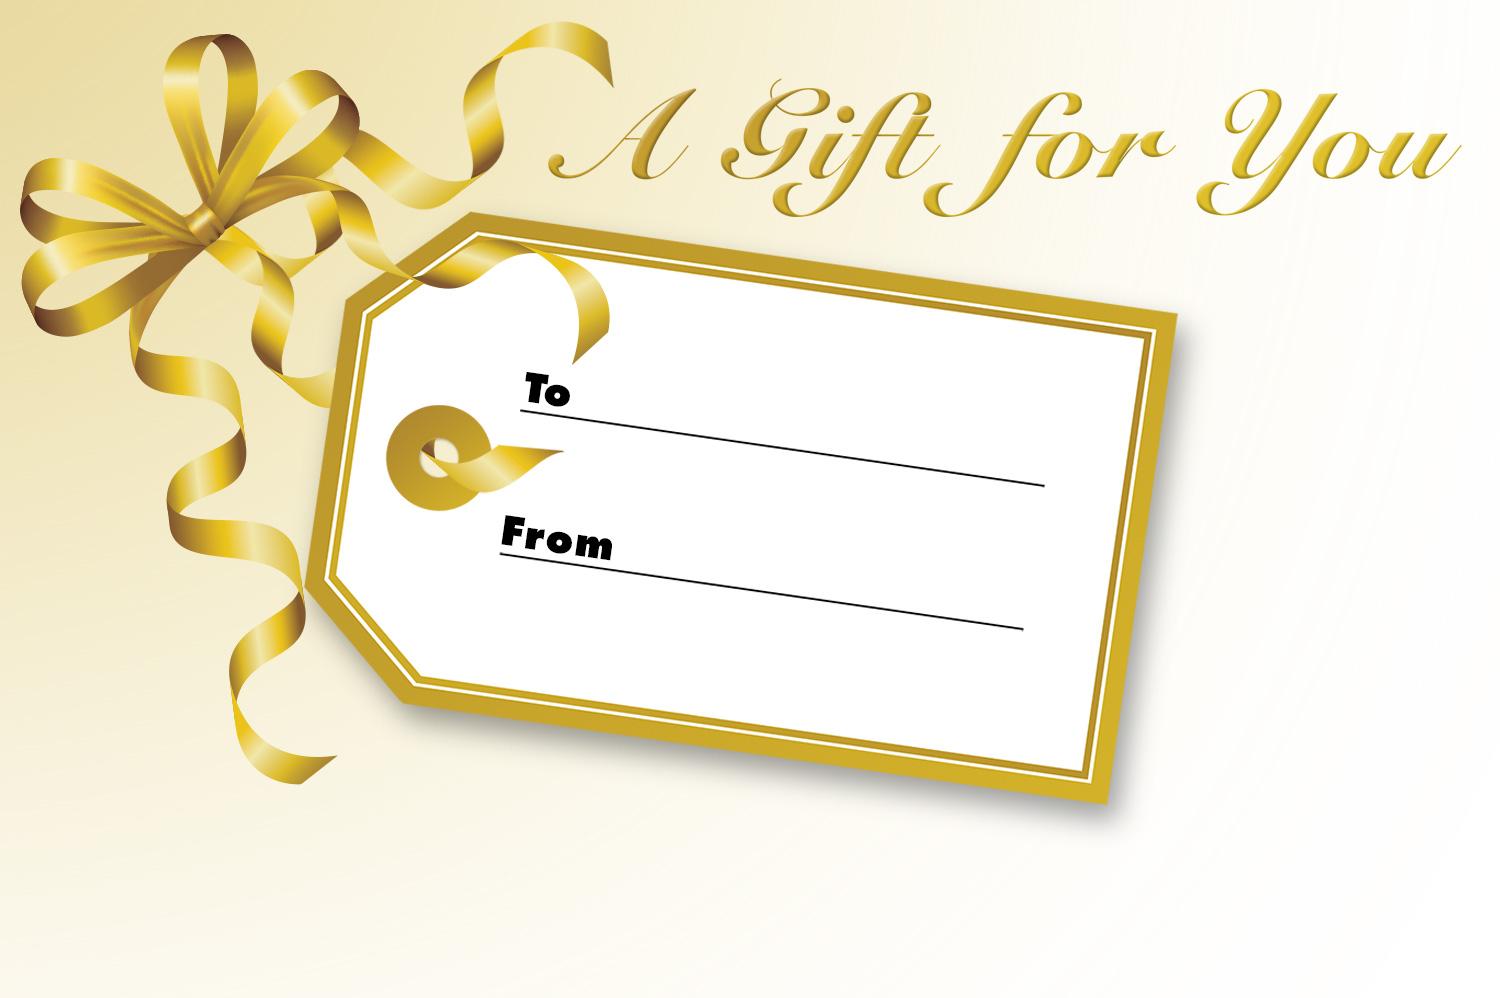 Gift Cards / Courtesy Certificates / Award Certificates